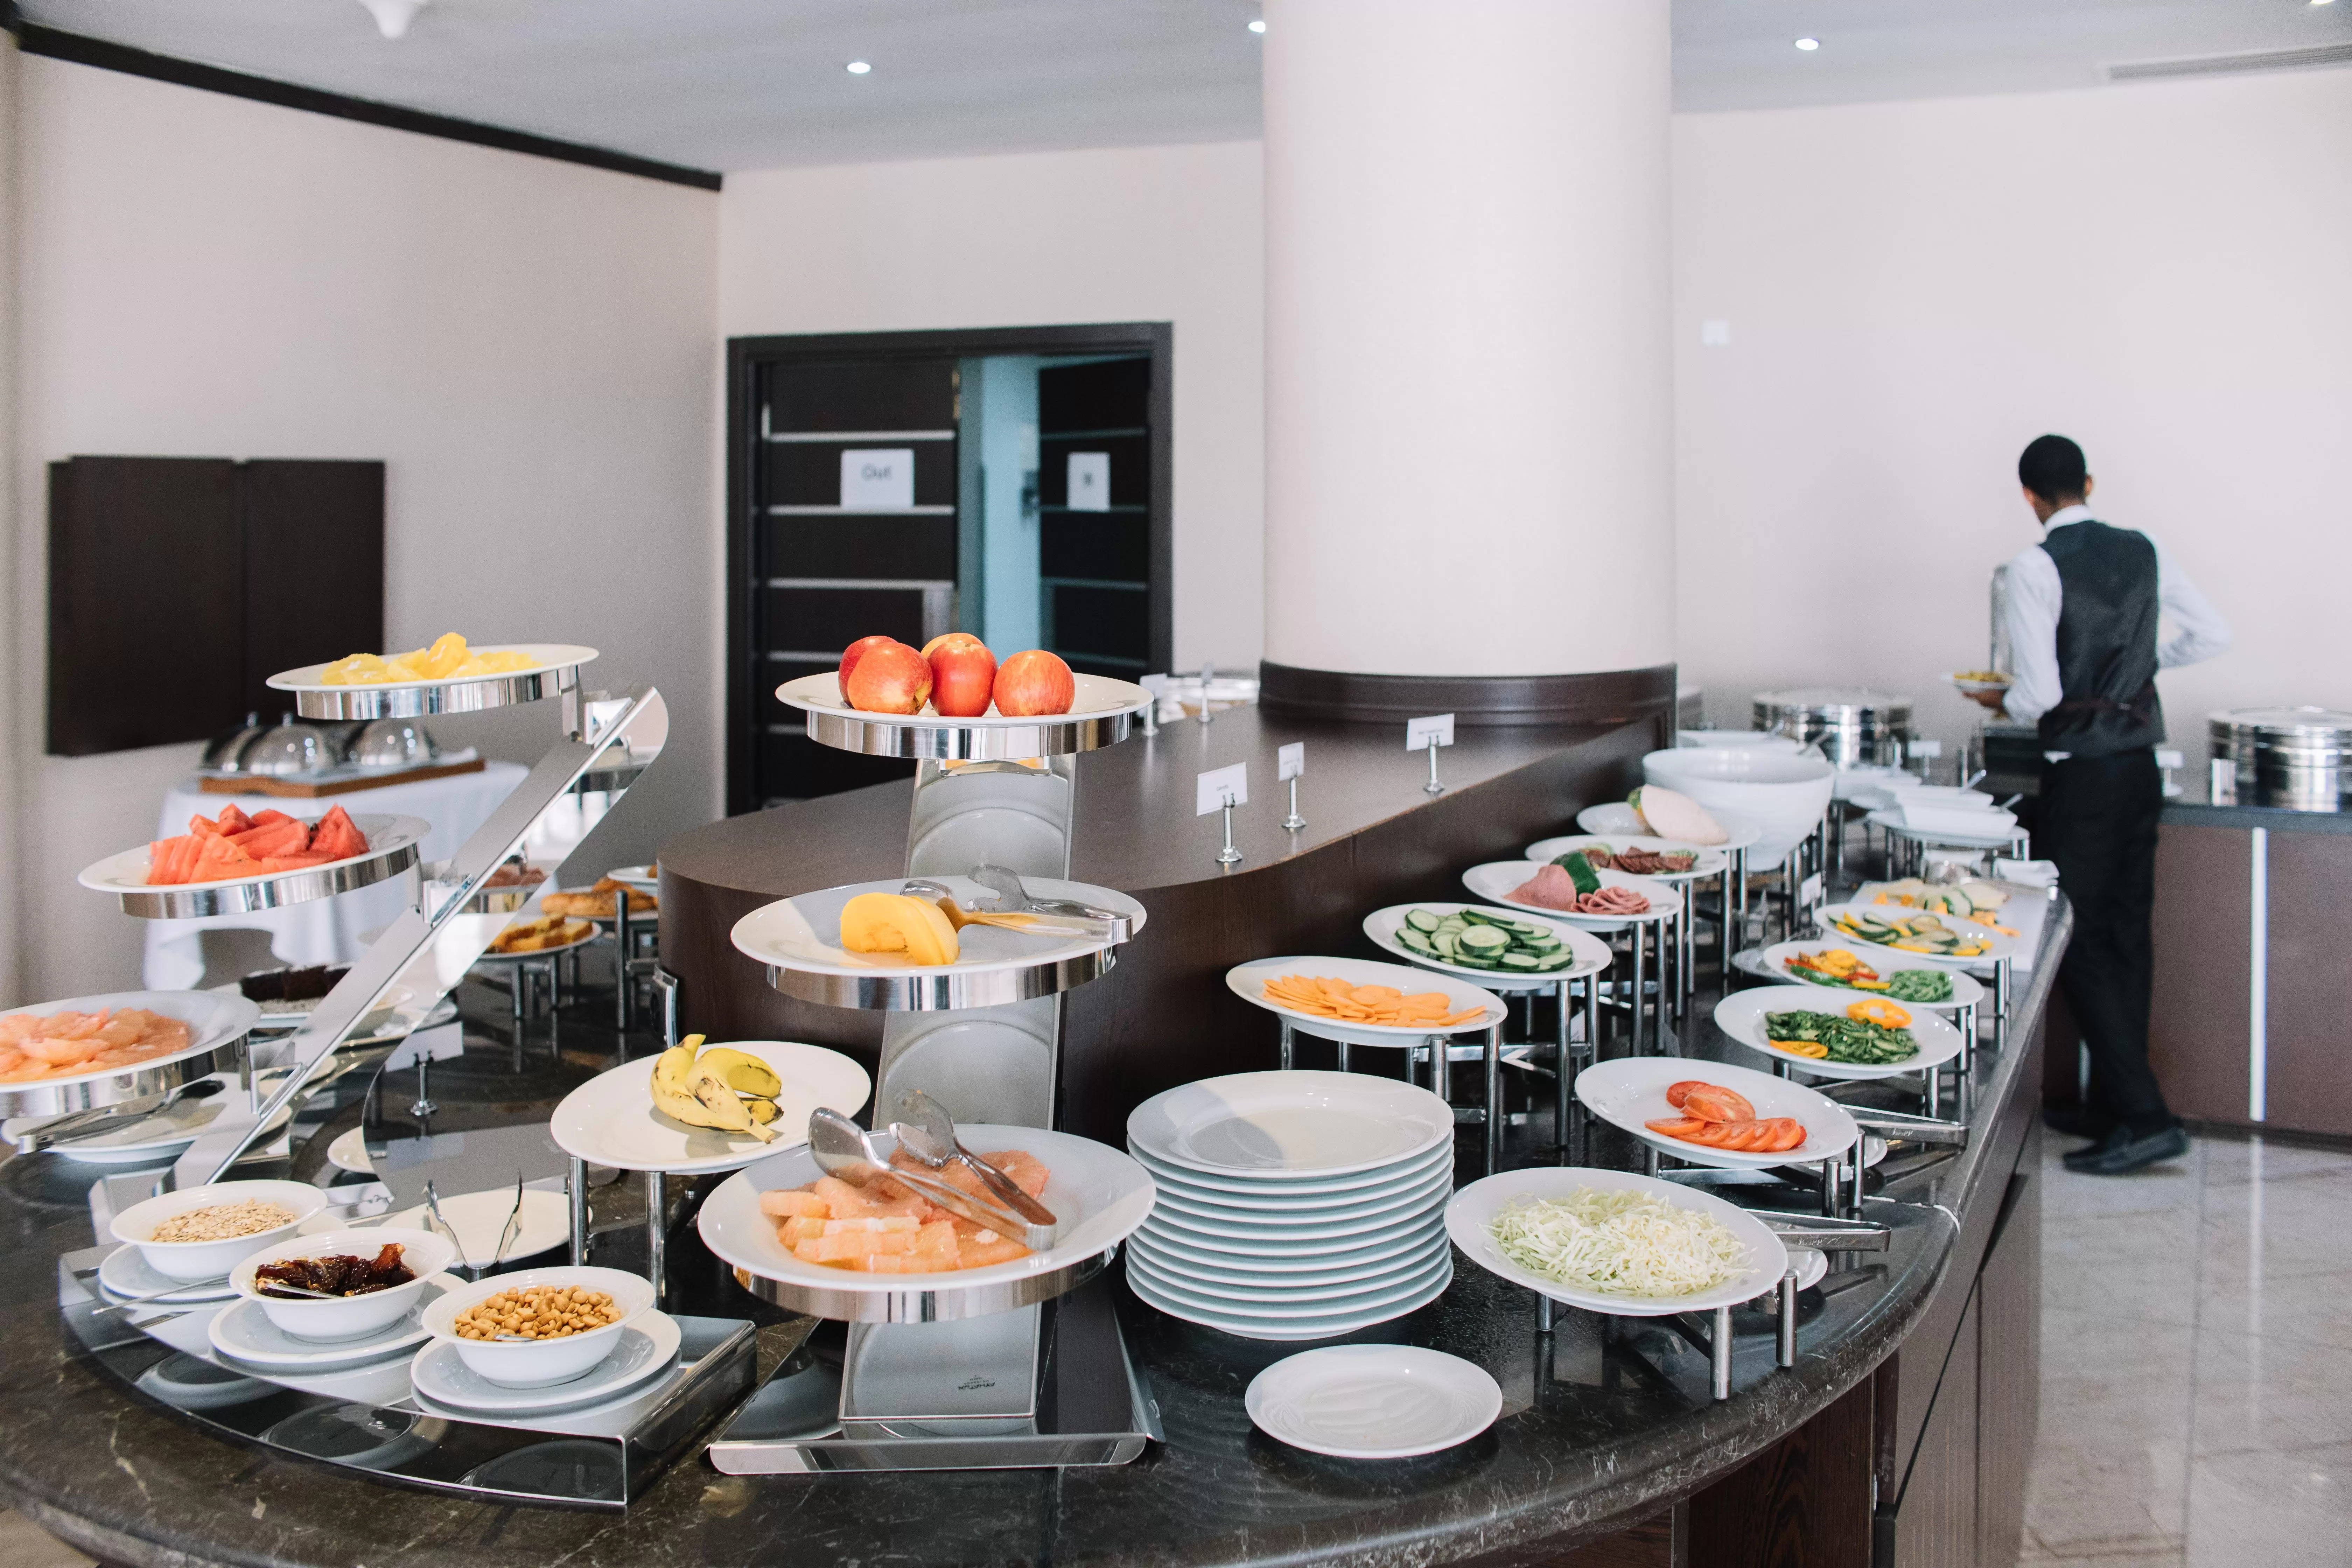 a picture of the breakfast buffet at best western plus hotel in addis ababa with fruit, cereal, salads, egg dishes, and ore.